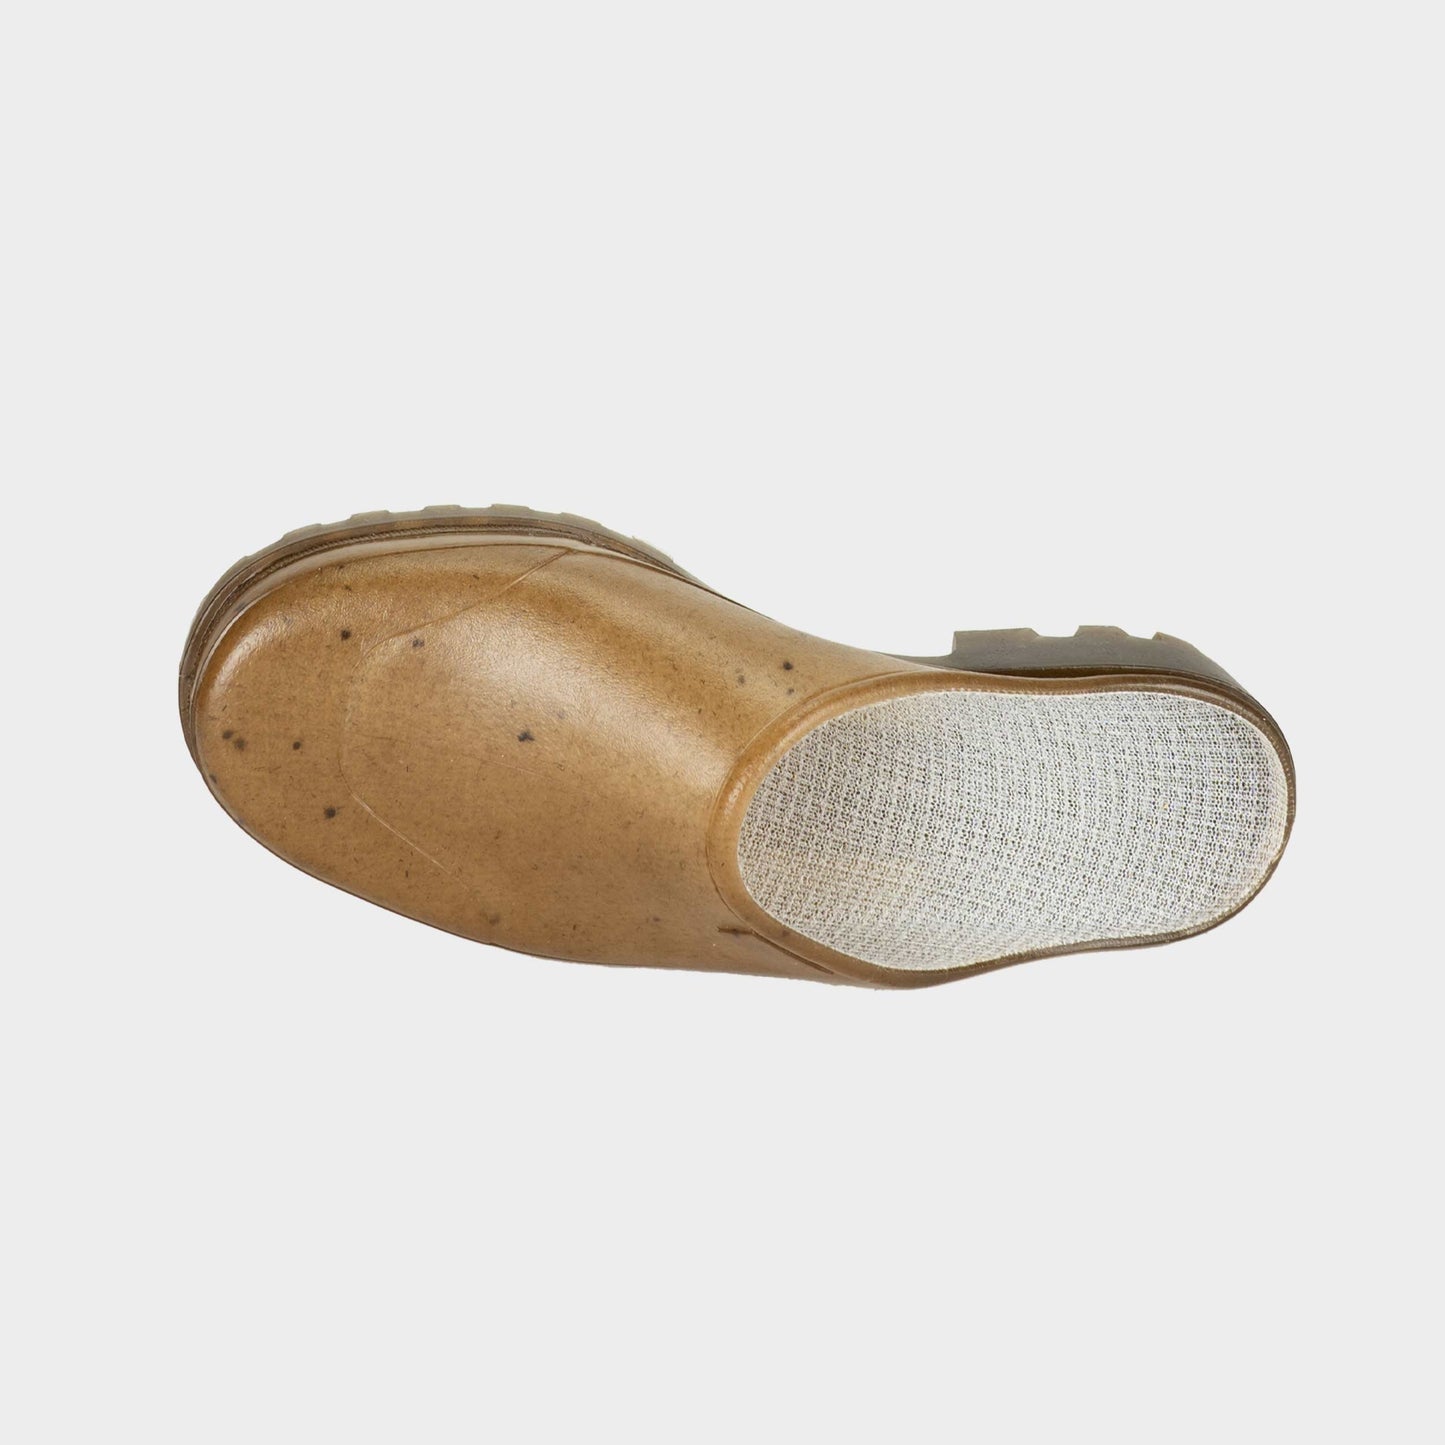 French Recycled Hemp Mules in Sepia